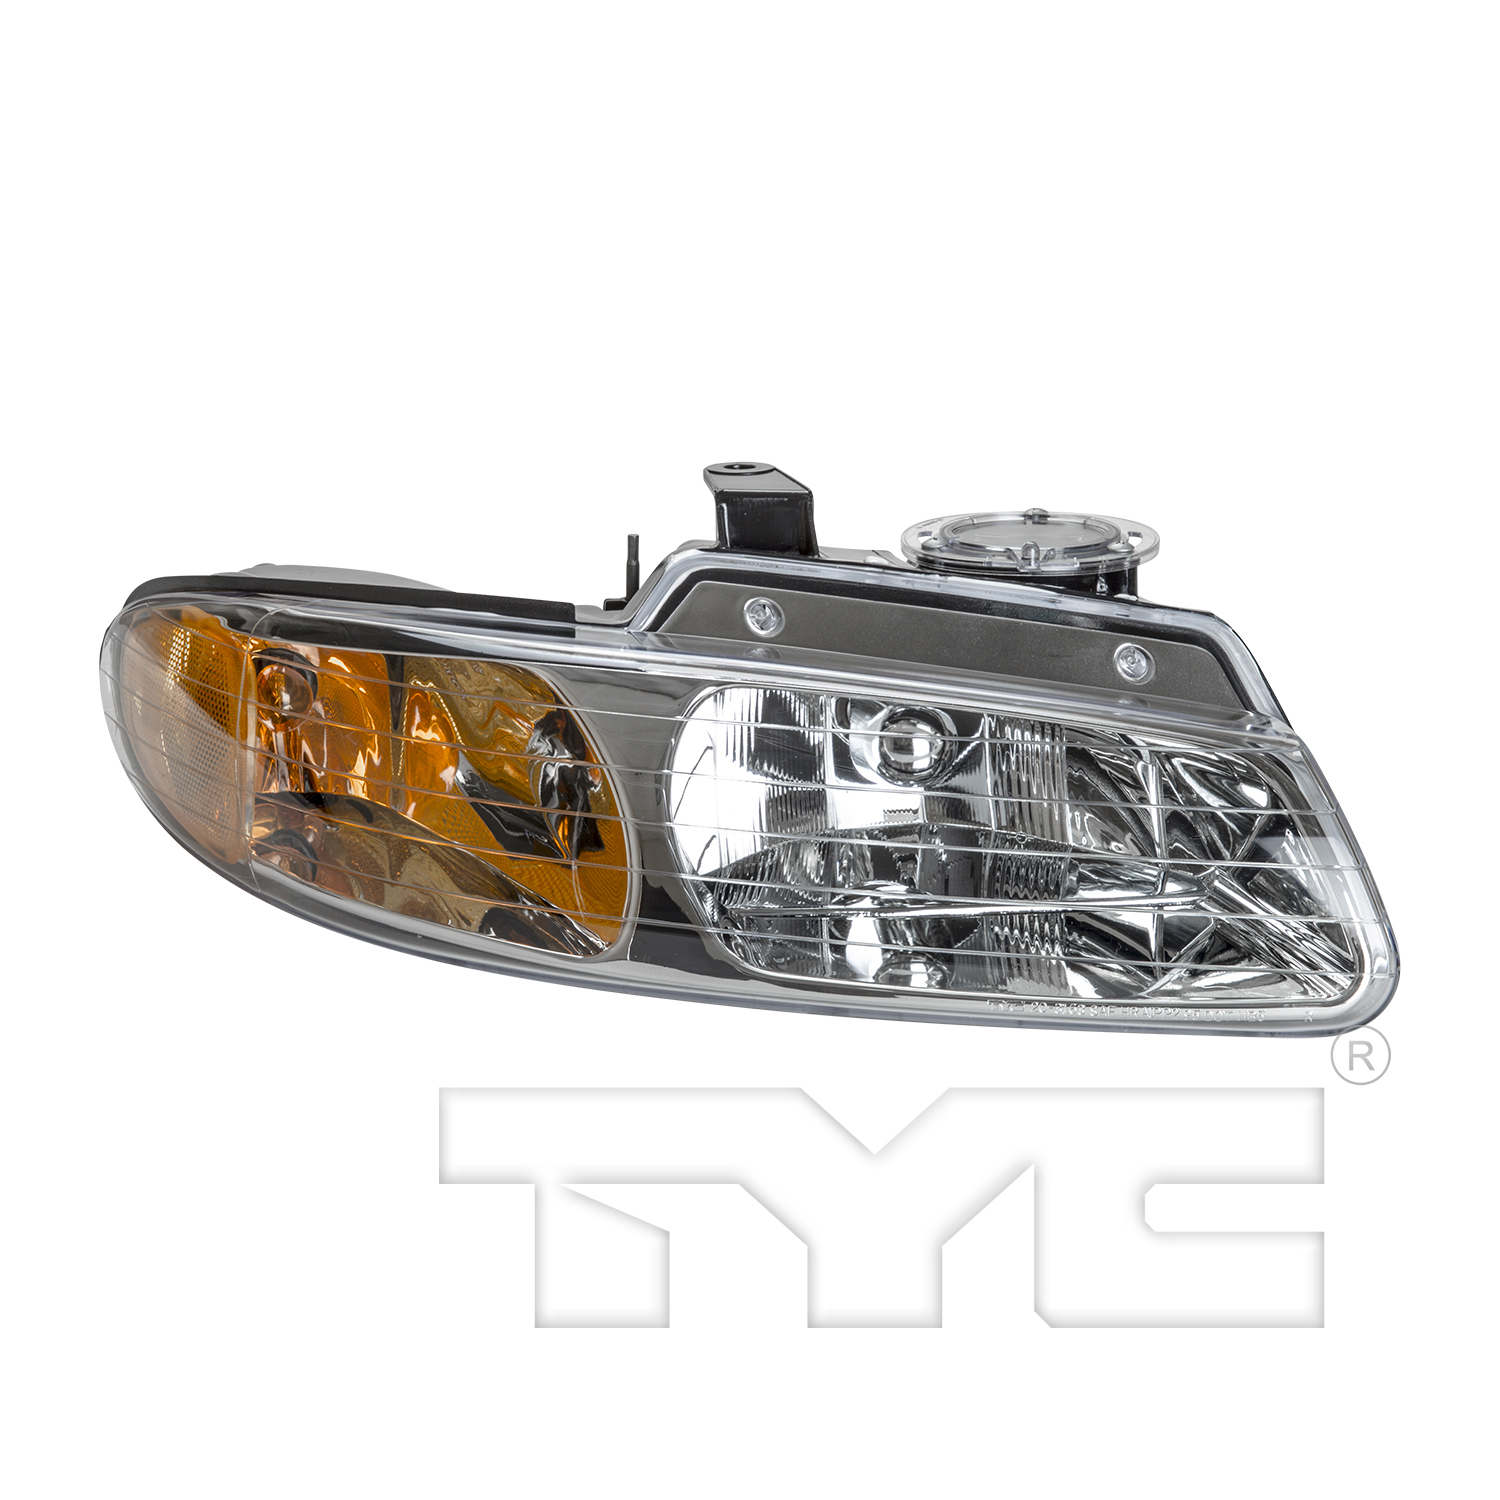 Aftermarket HEADLIGHTS for PLYMOUTH - VOYAGER, VOYAGER,96-99,RT Headlamp assy composite